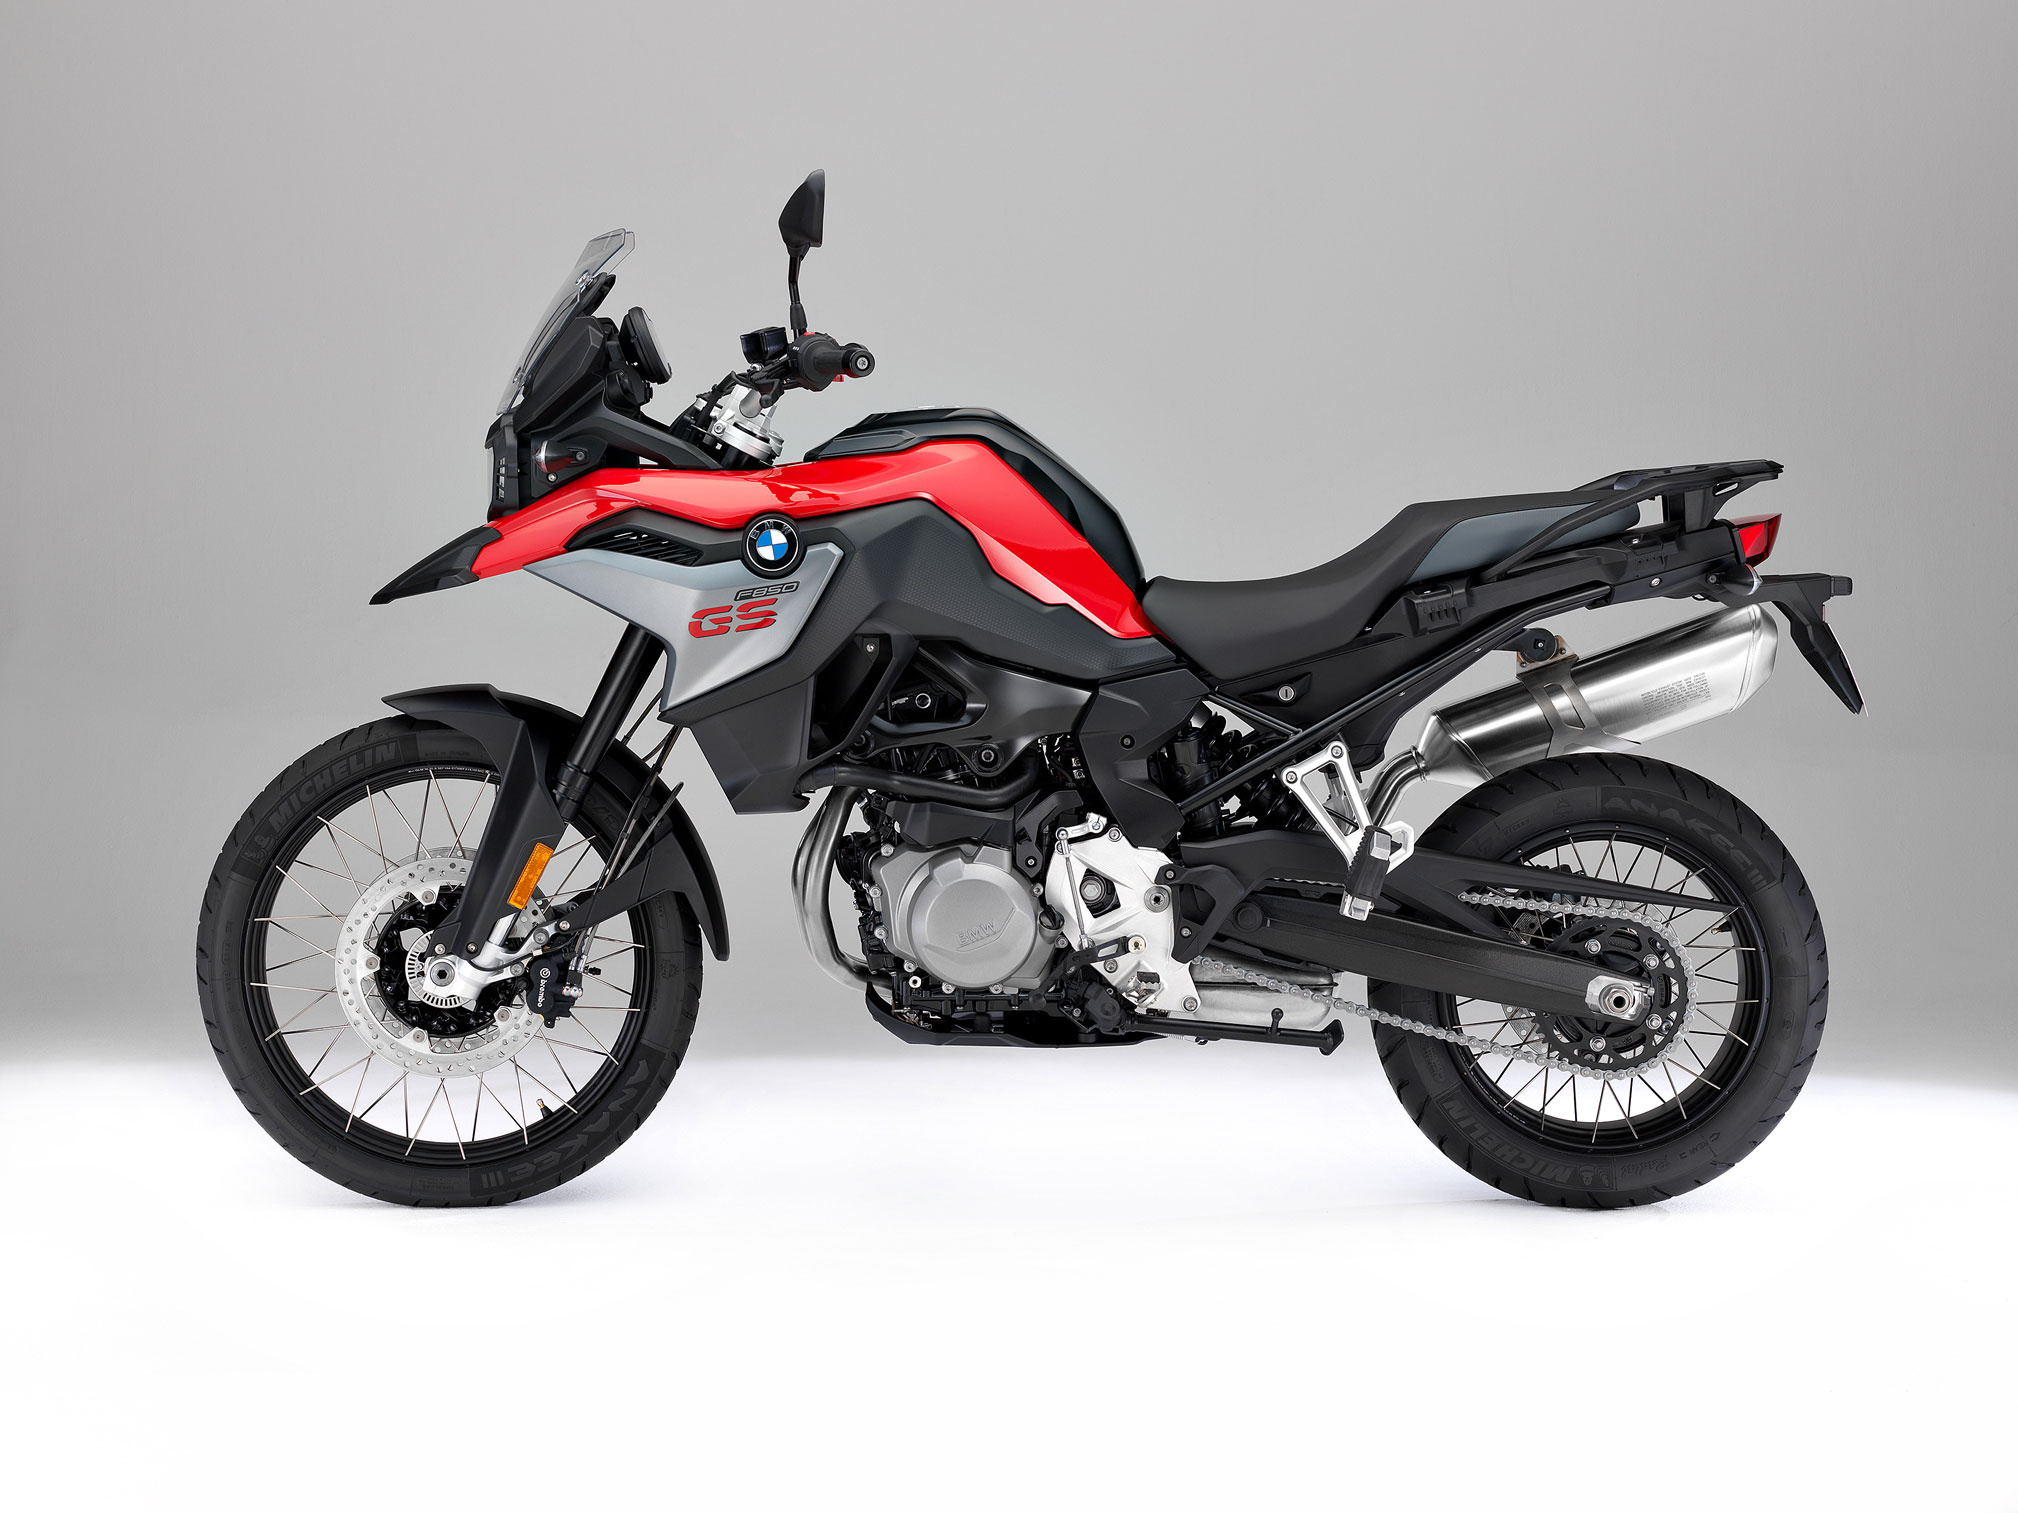 BMW F 850 GS, 2018 review, Powerful and agile, Perfect adventure bike, 2020x1520 HD Desktop